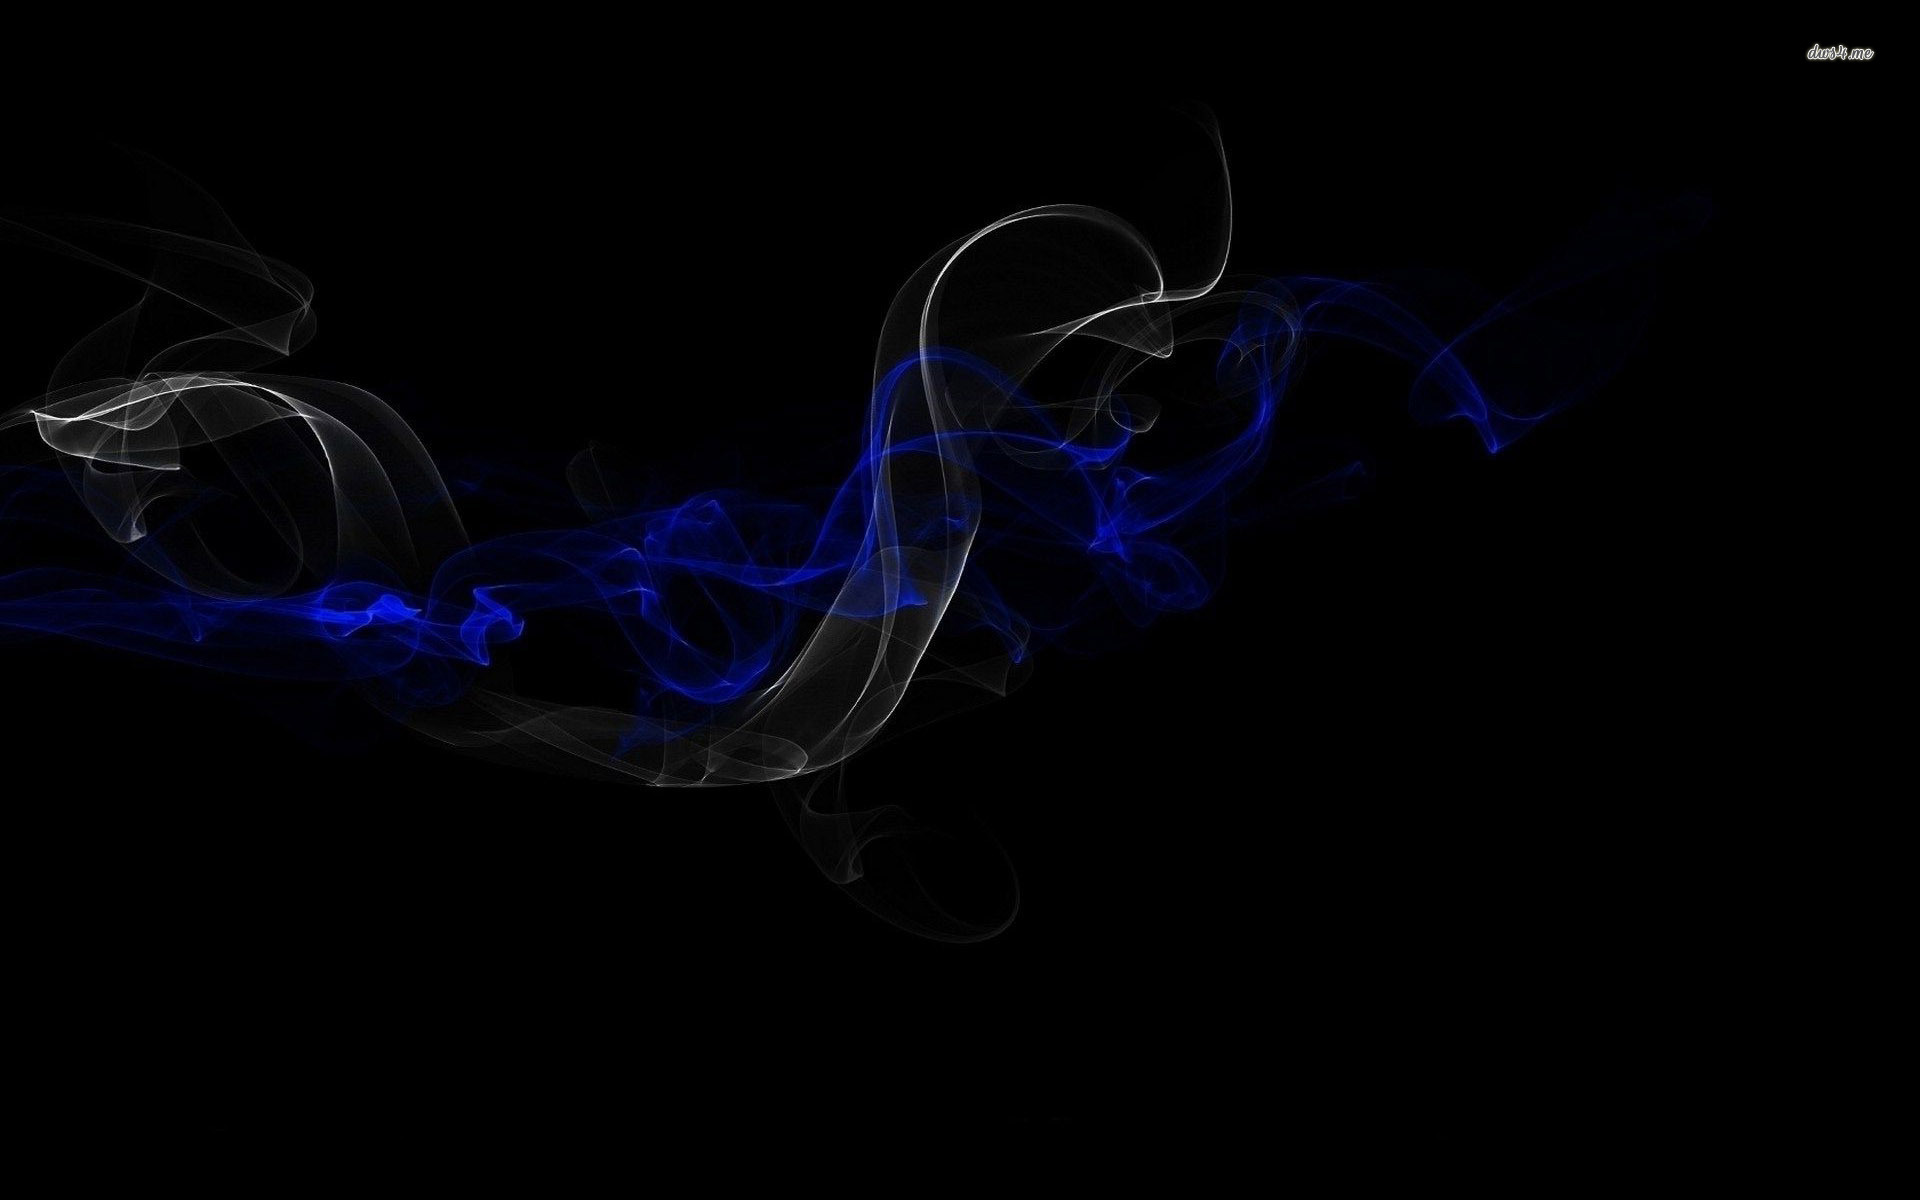 Blue and grey smoke wallpaper - Abstract wallpapers - #21864